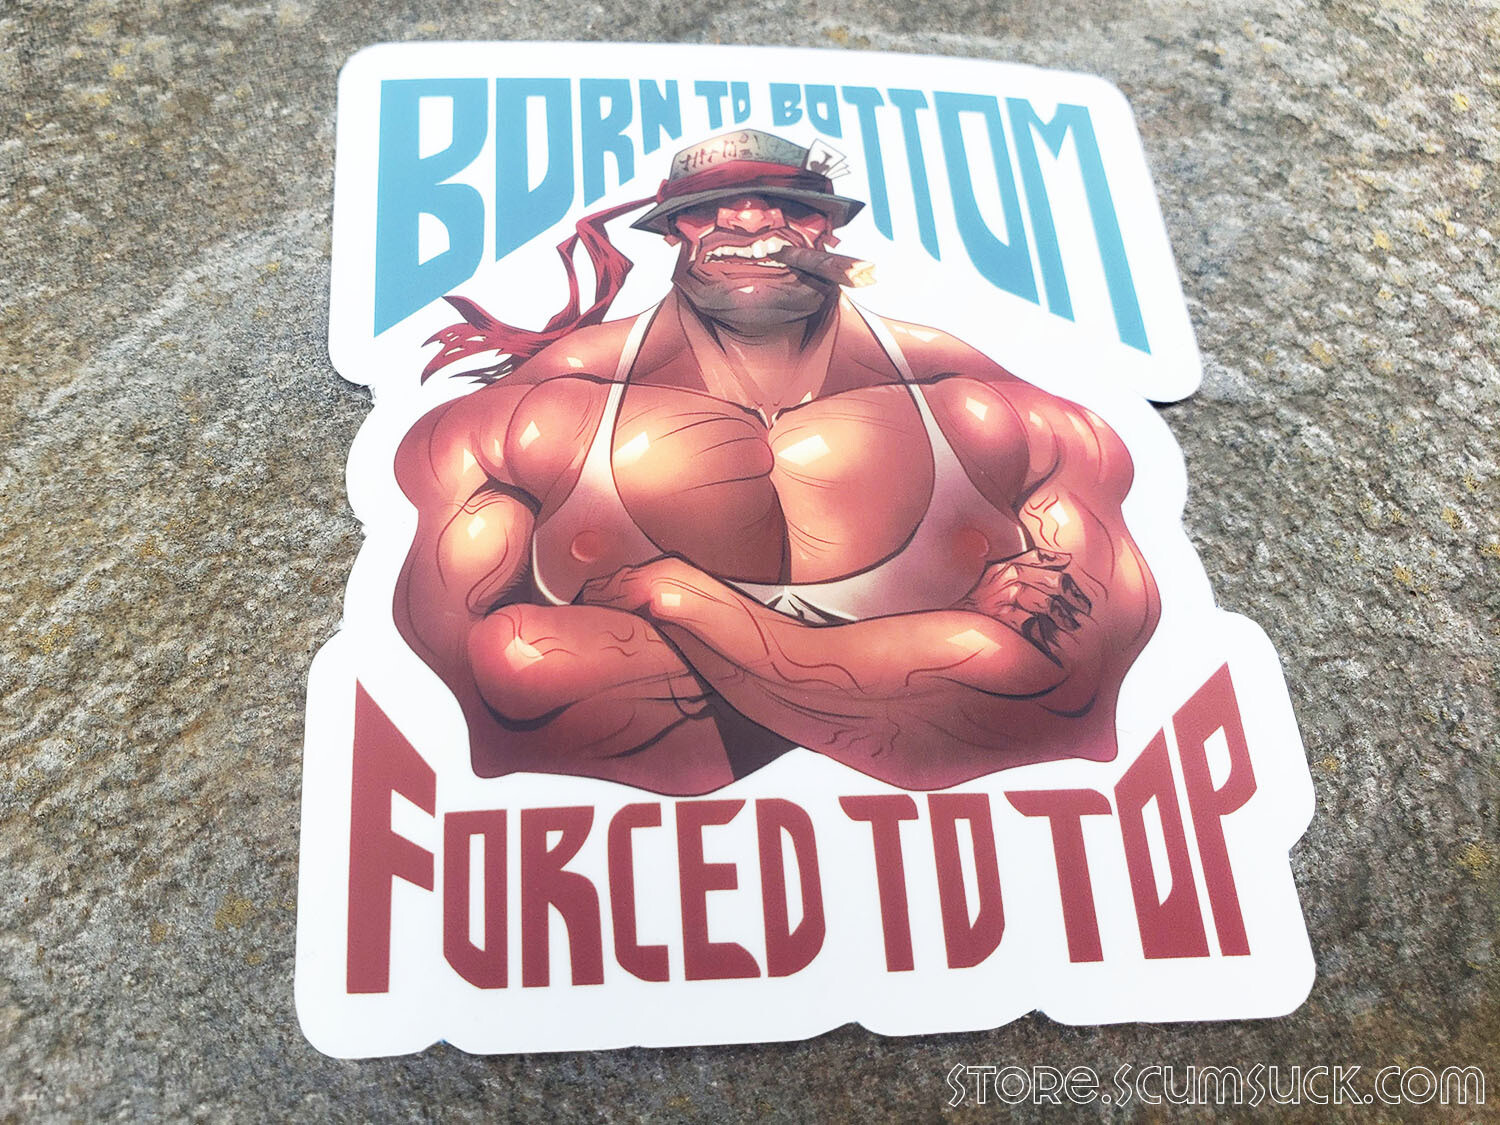 Soldier Born To Bottom stickers